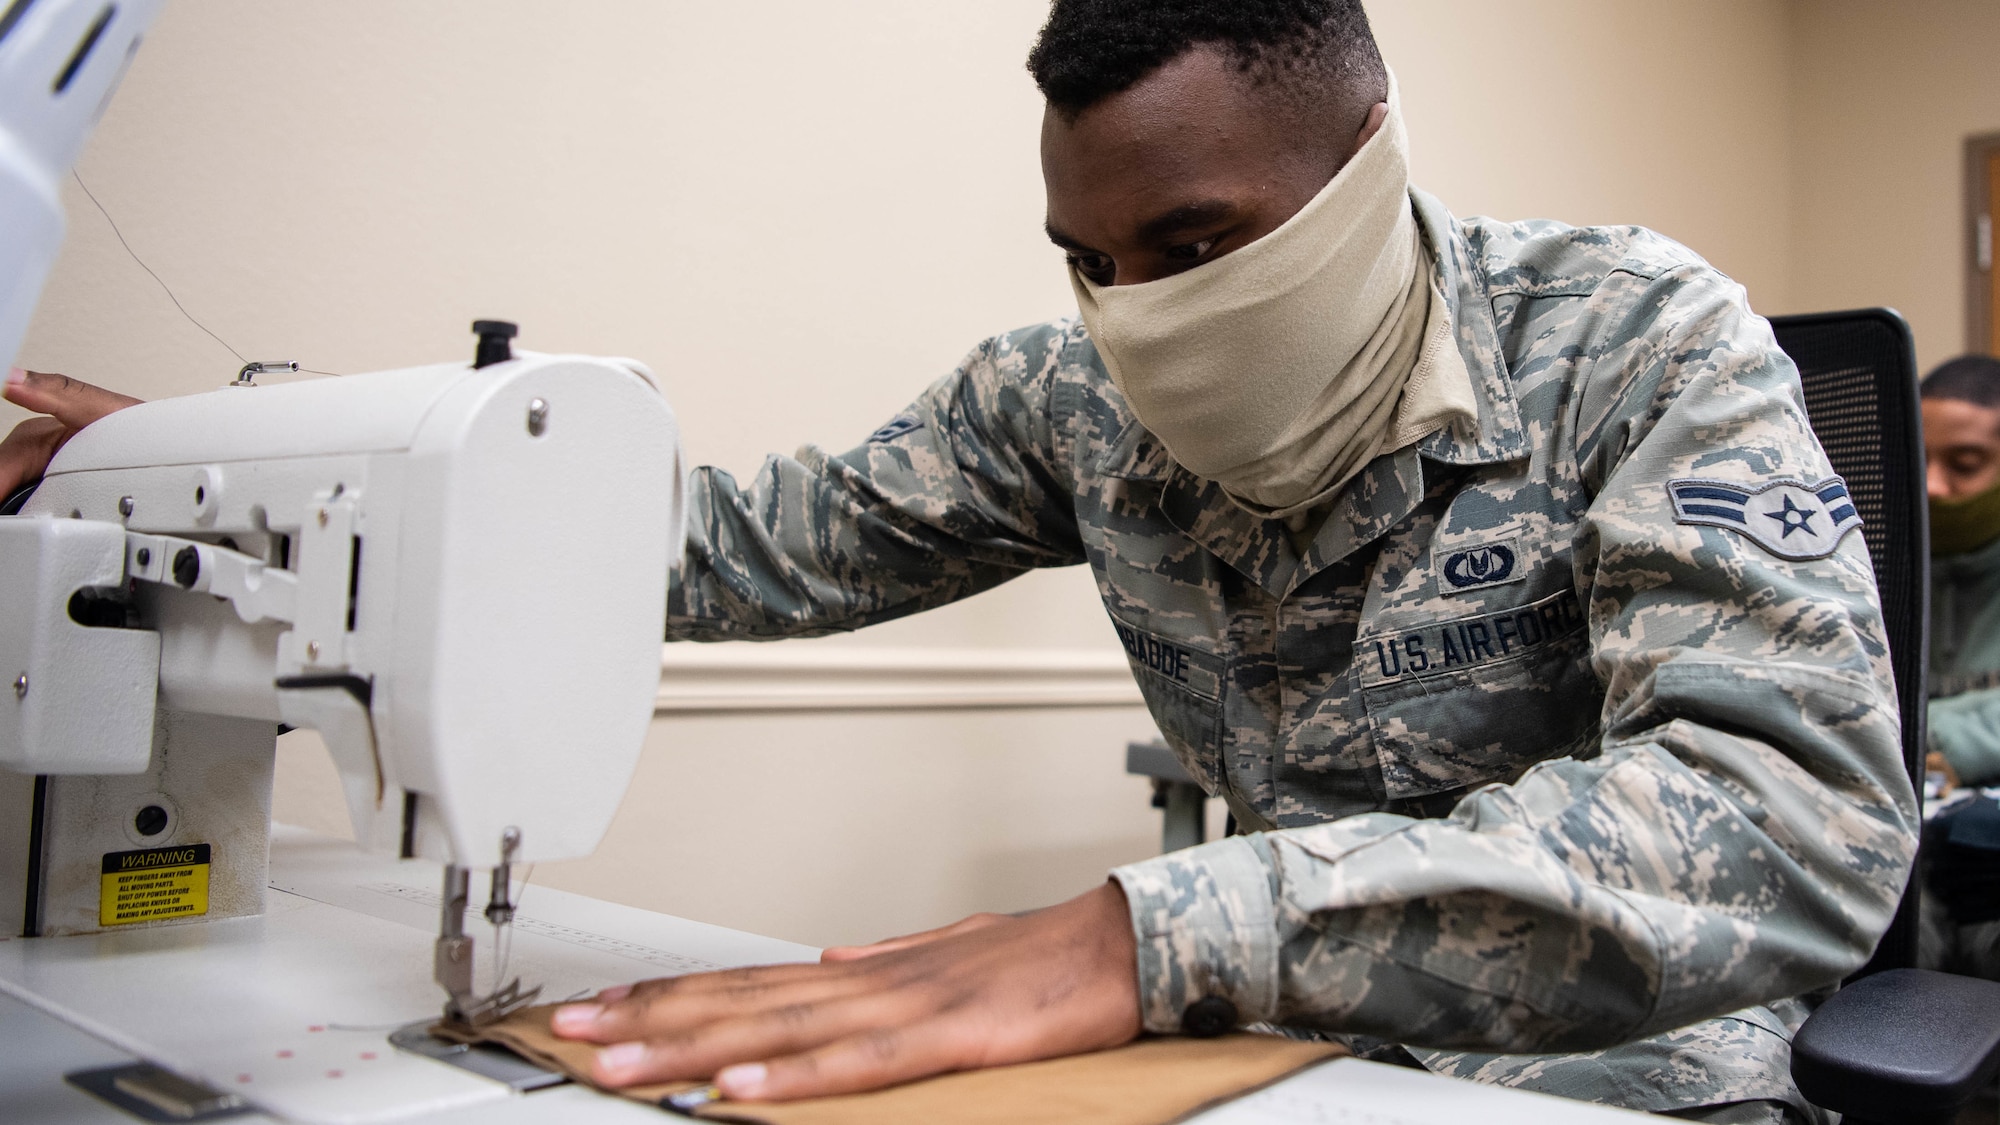 Airman 1st Class David S. Kyambadde, 2nd Operations Support Squadron aircrew flight equipment maintainer, operates a sewing machine to sew face masks at Barksdale Air Force Base, La., April 16, 2020. All Airmen of the 2nd OSS AFE shop learned to sew as part of their technical training to repair aircrew equipment including parachutes, flight suits and other various equipment. (U.S. Air Force photo by Airman 1st Class Jacob B. Wrightsman)